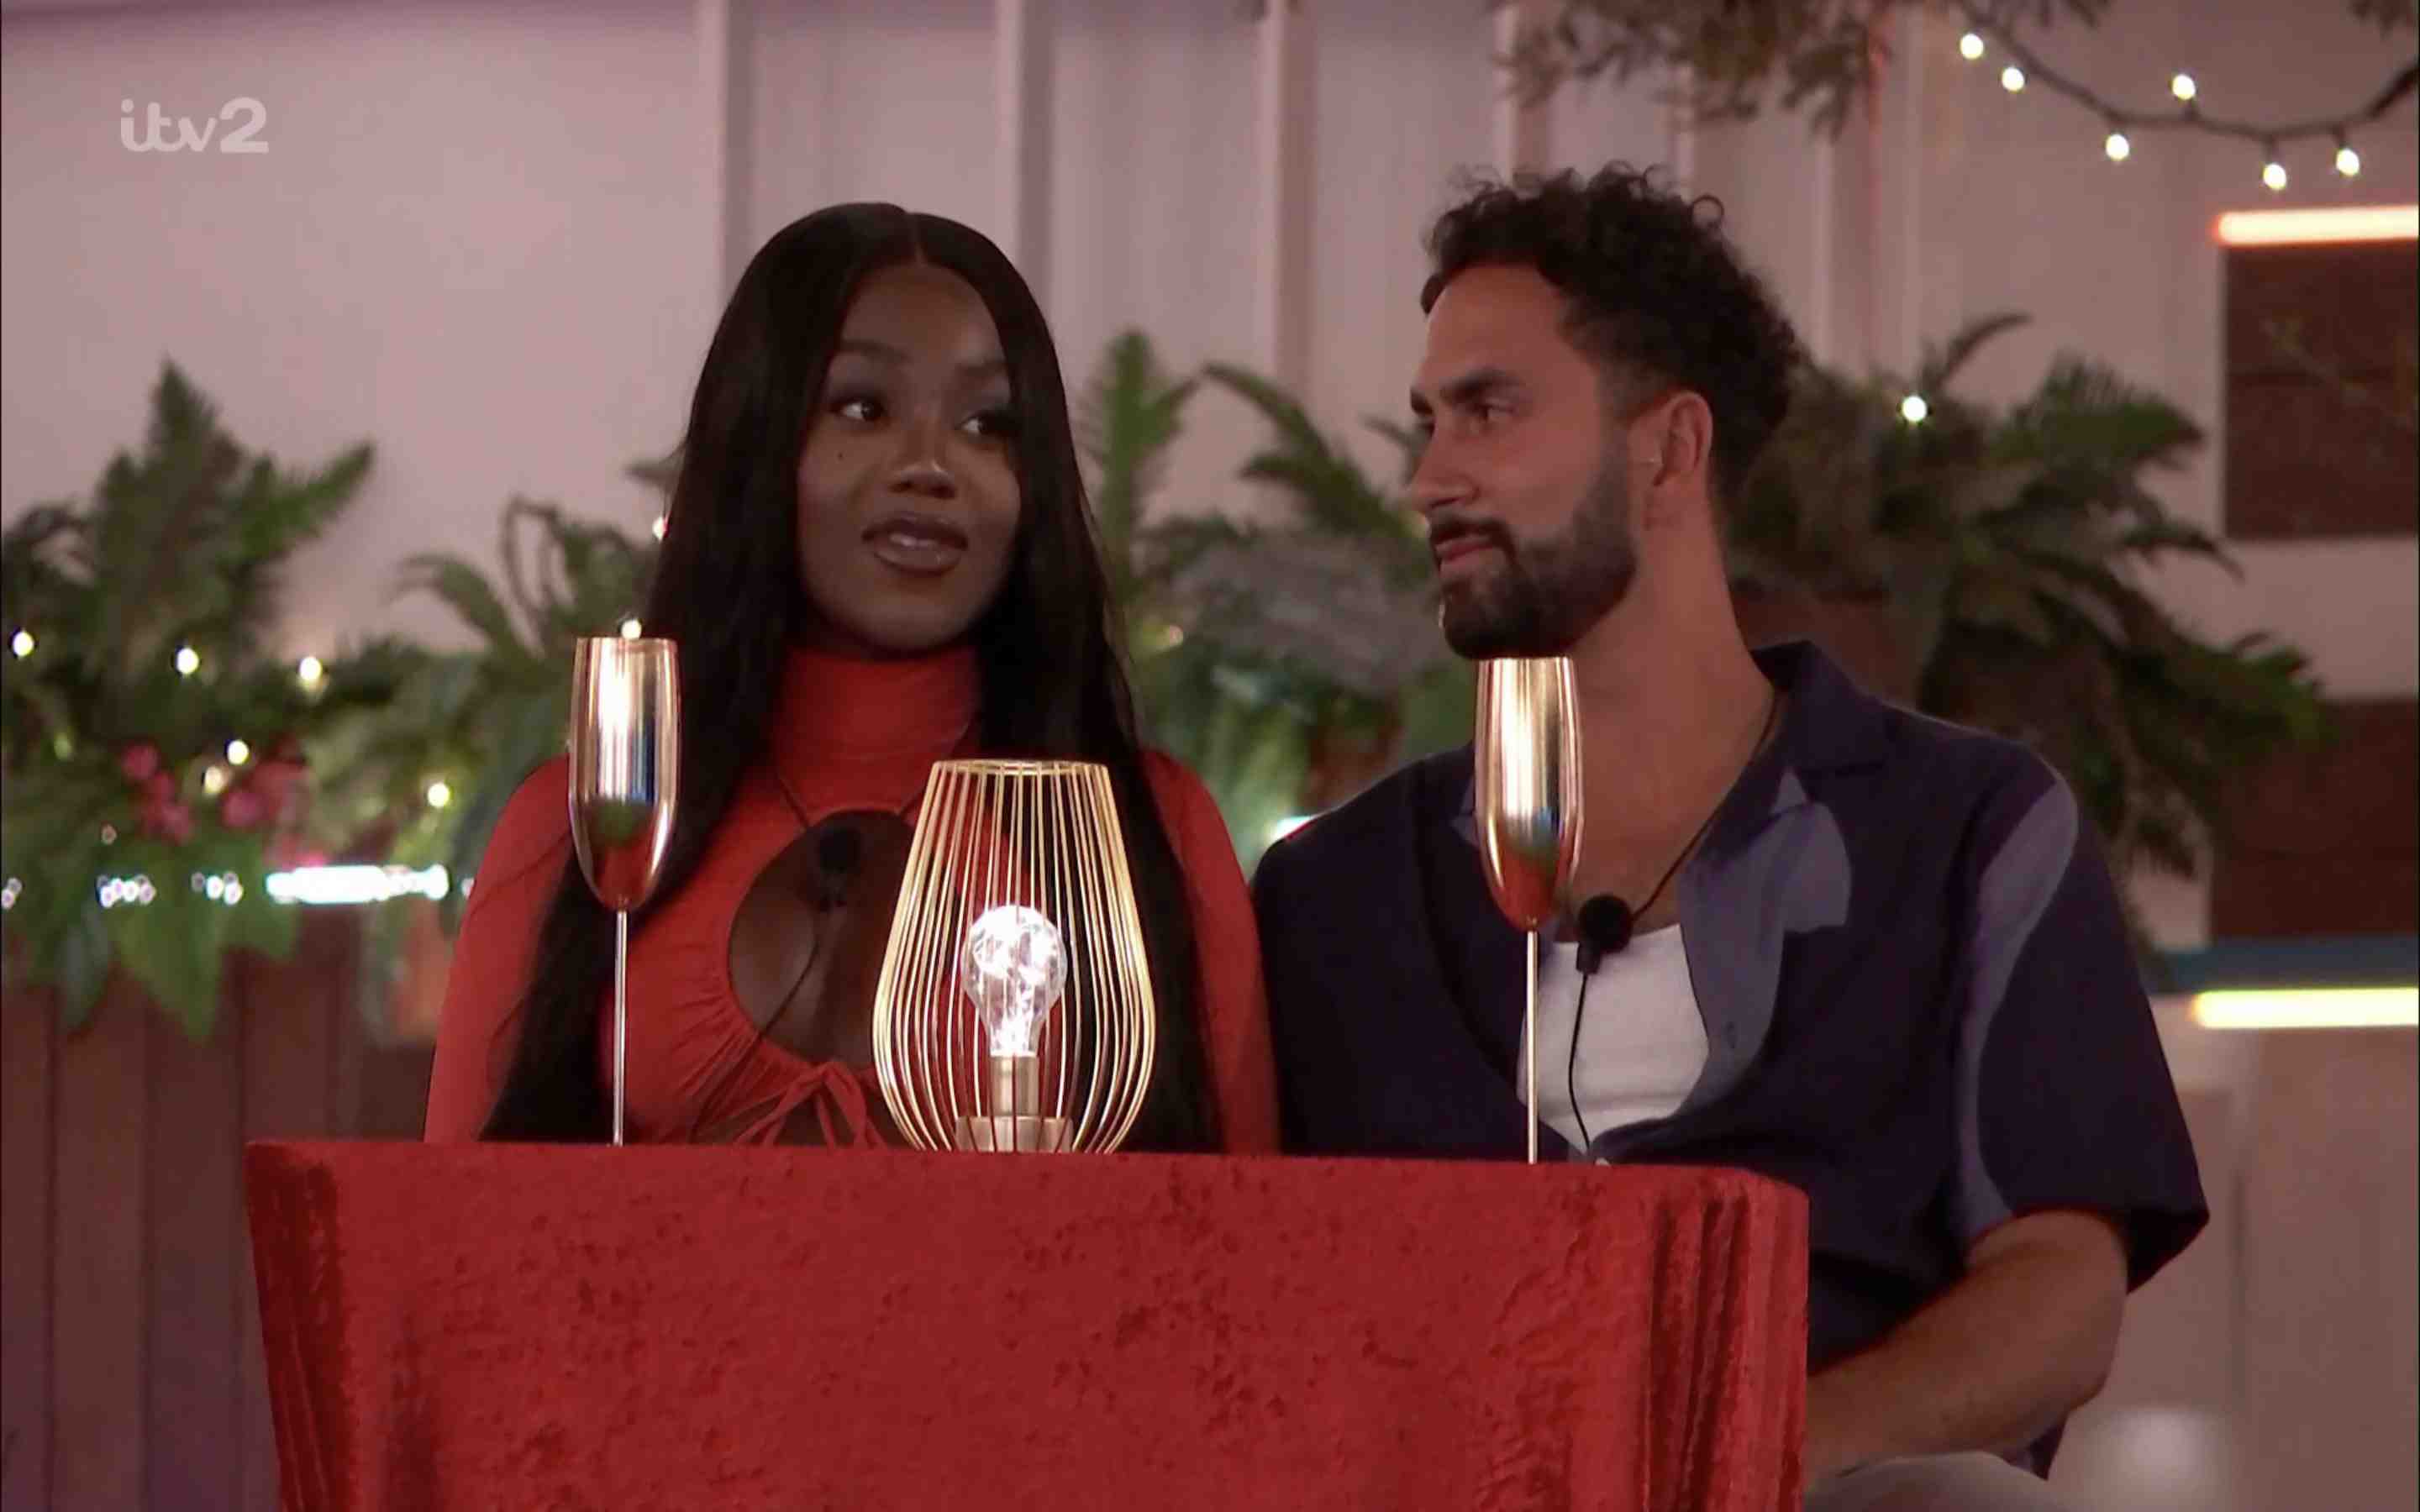 Lochan and Whitney defended themselves during the awards